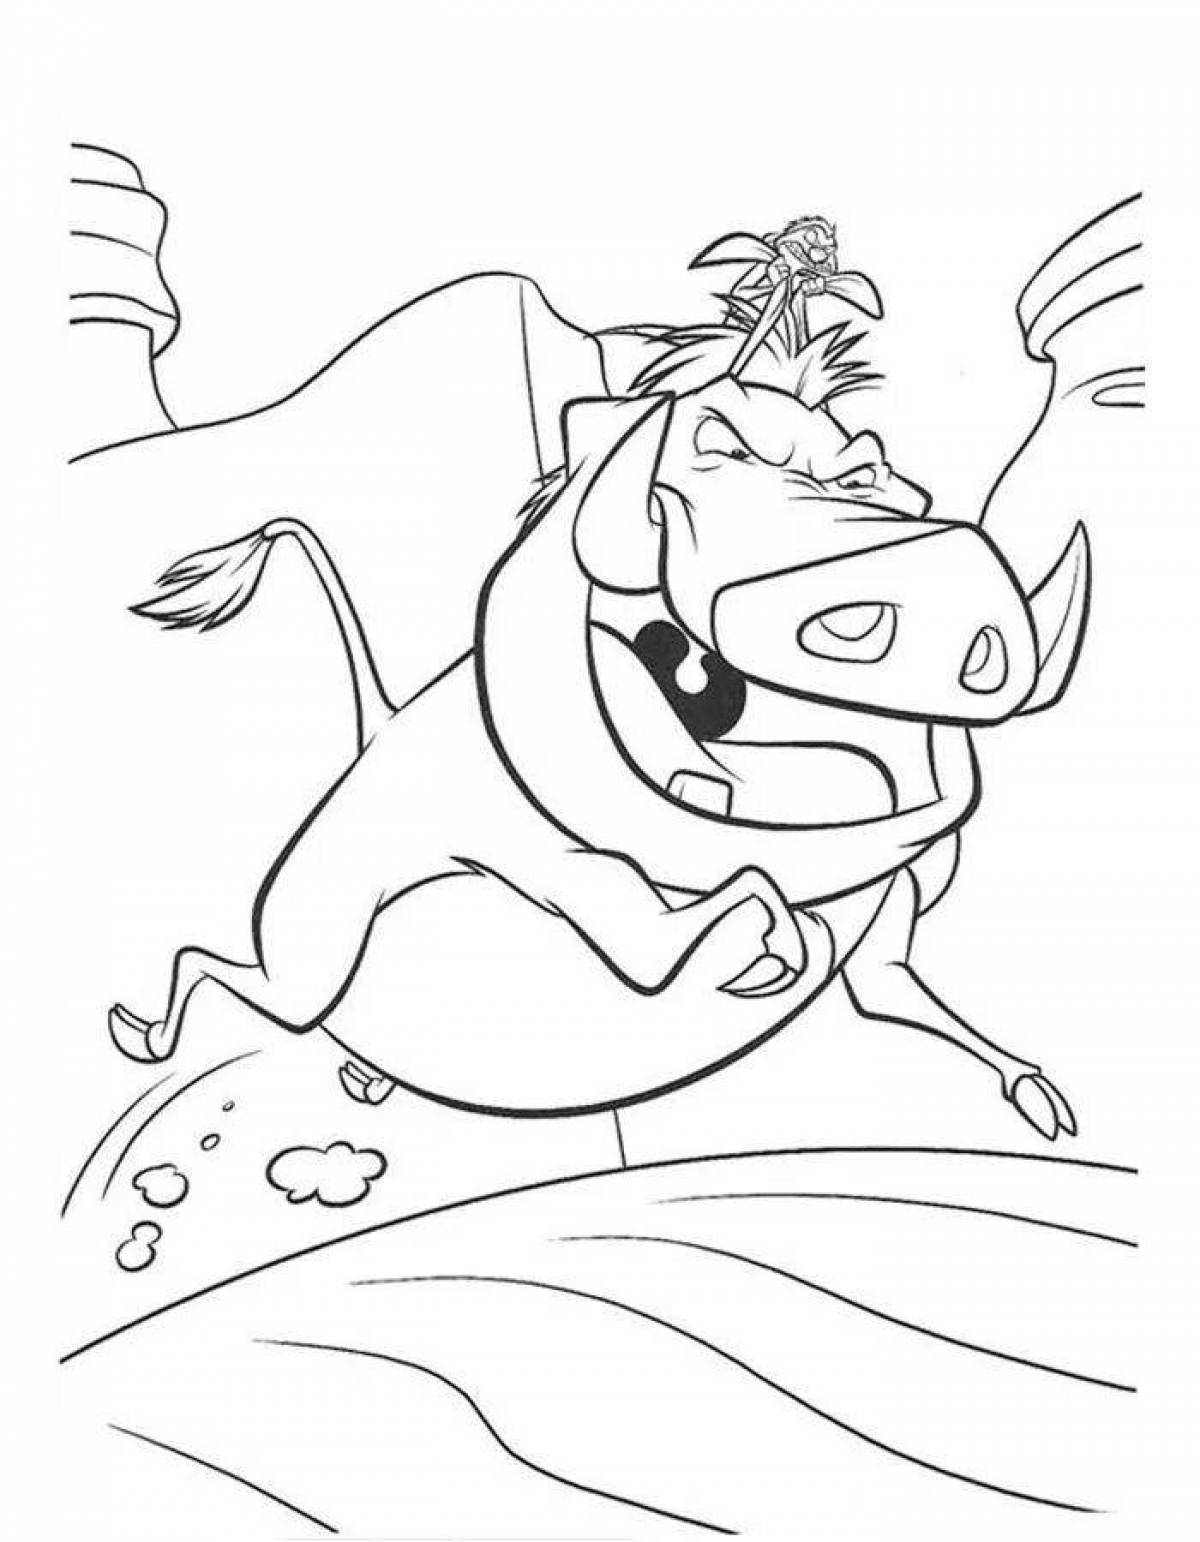 Adorable timon and pumbaa coloring book